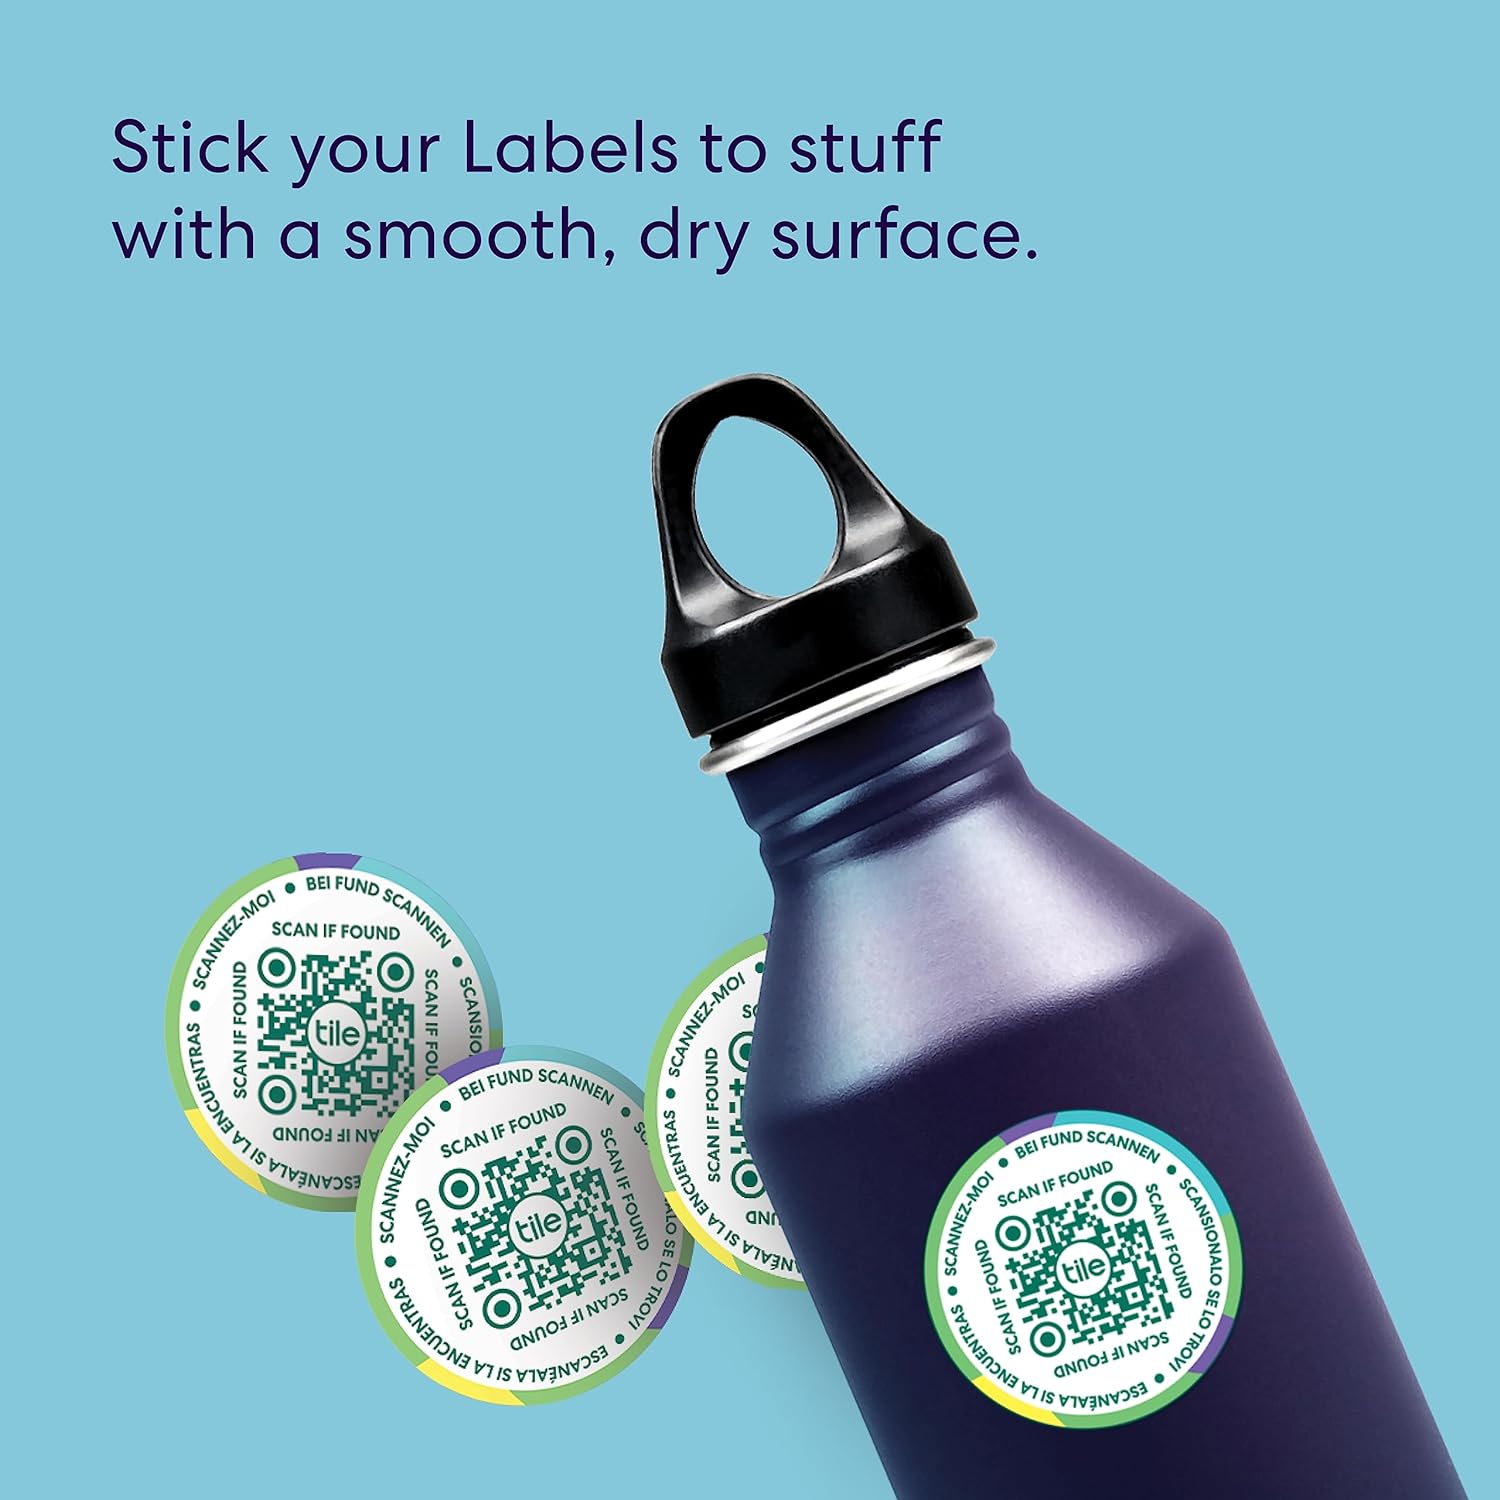 This image contains a dark blue water bottle with a black cap lying diagonally on a light blue background. There are also circular green and TileMate white labels with QR codes next to the bottle.